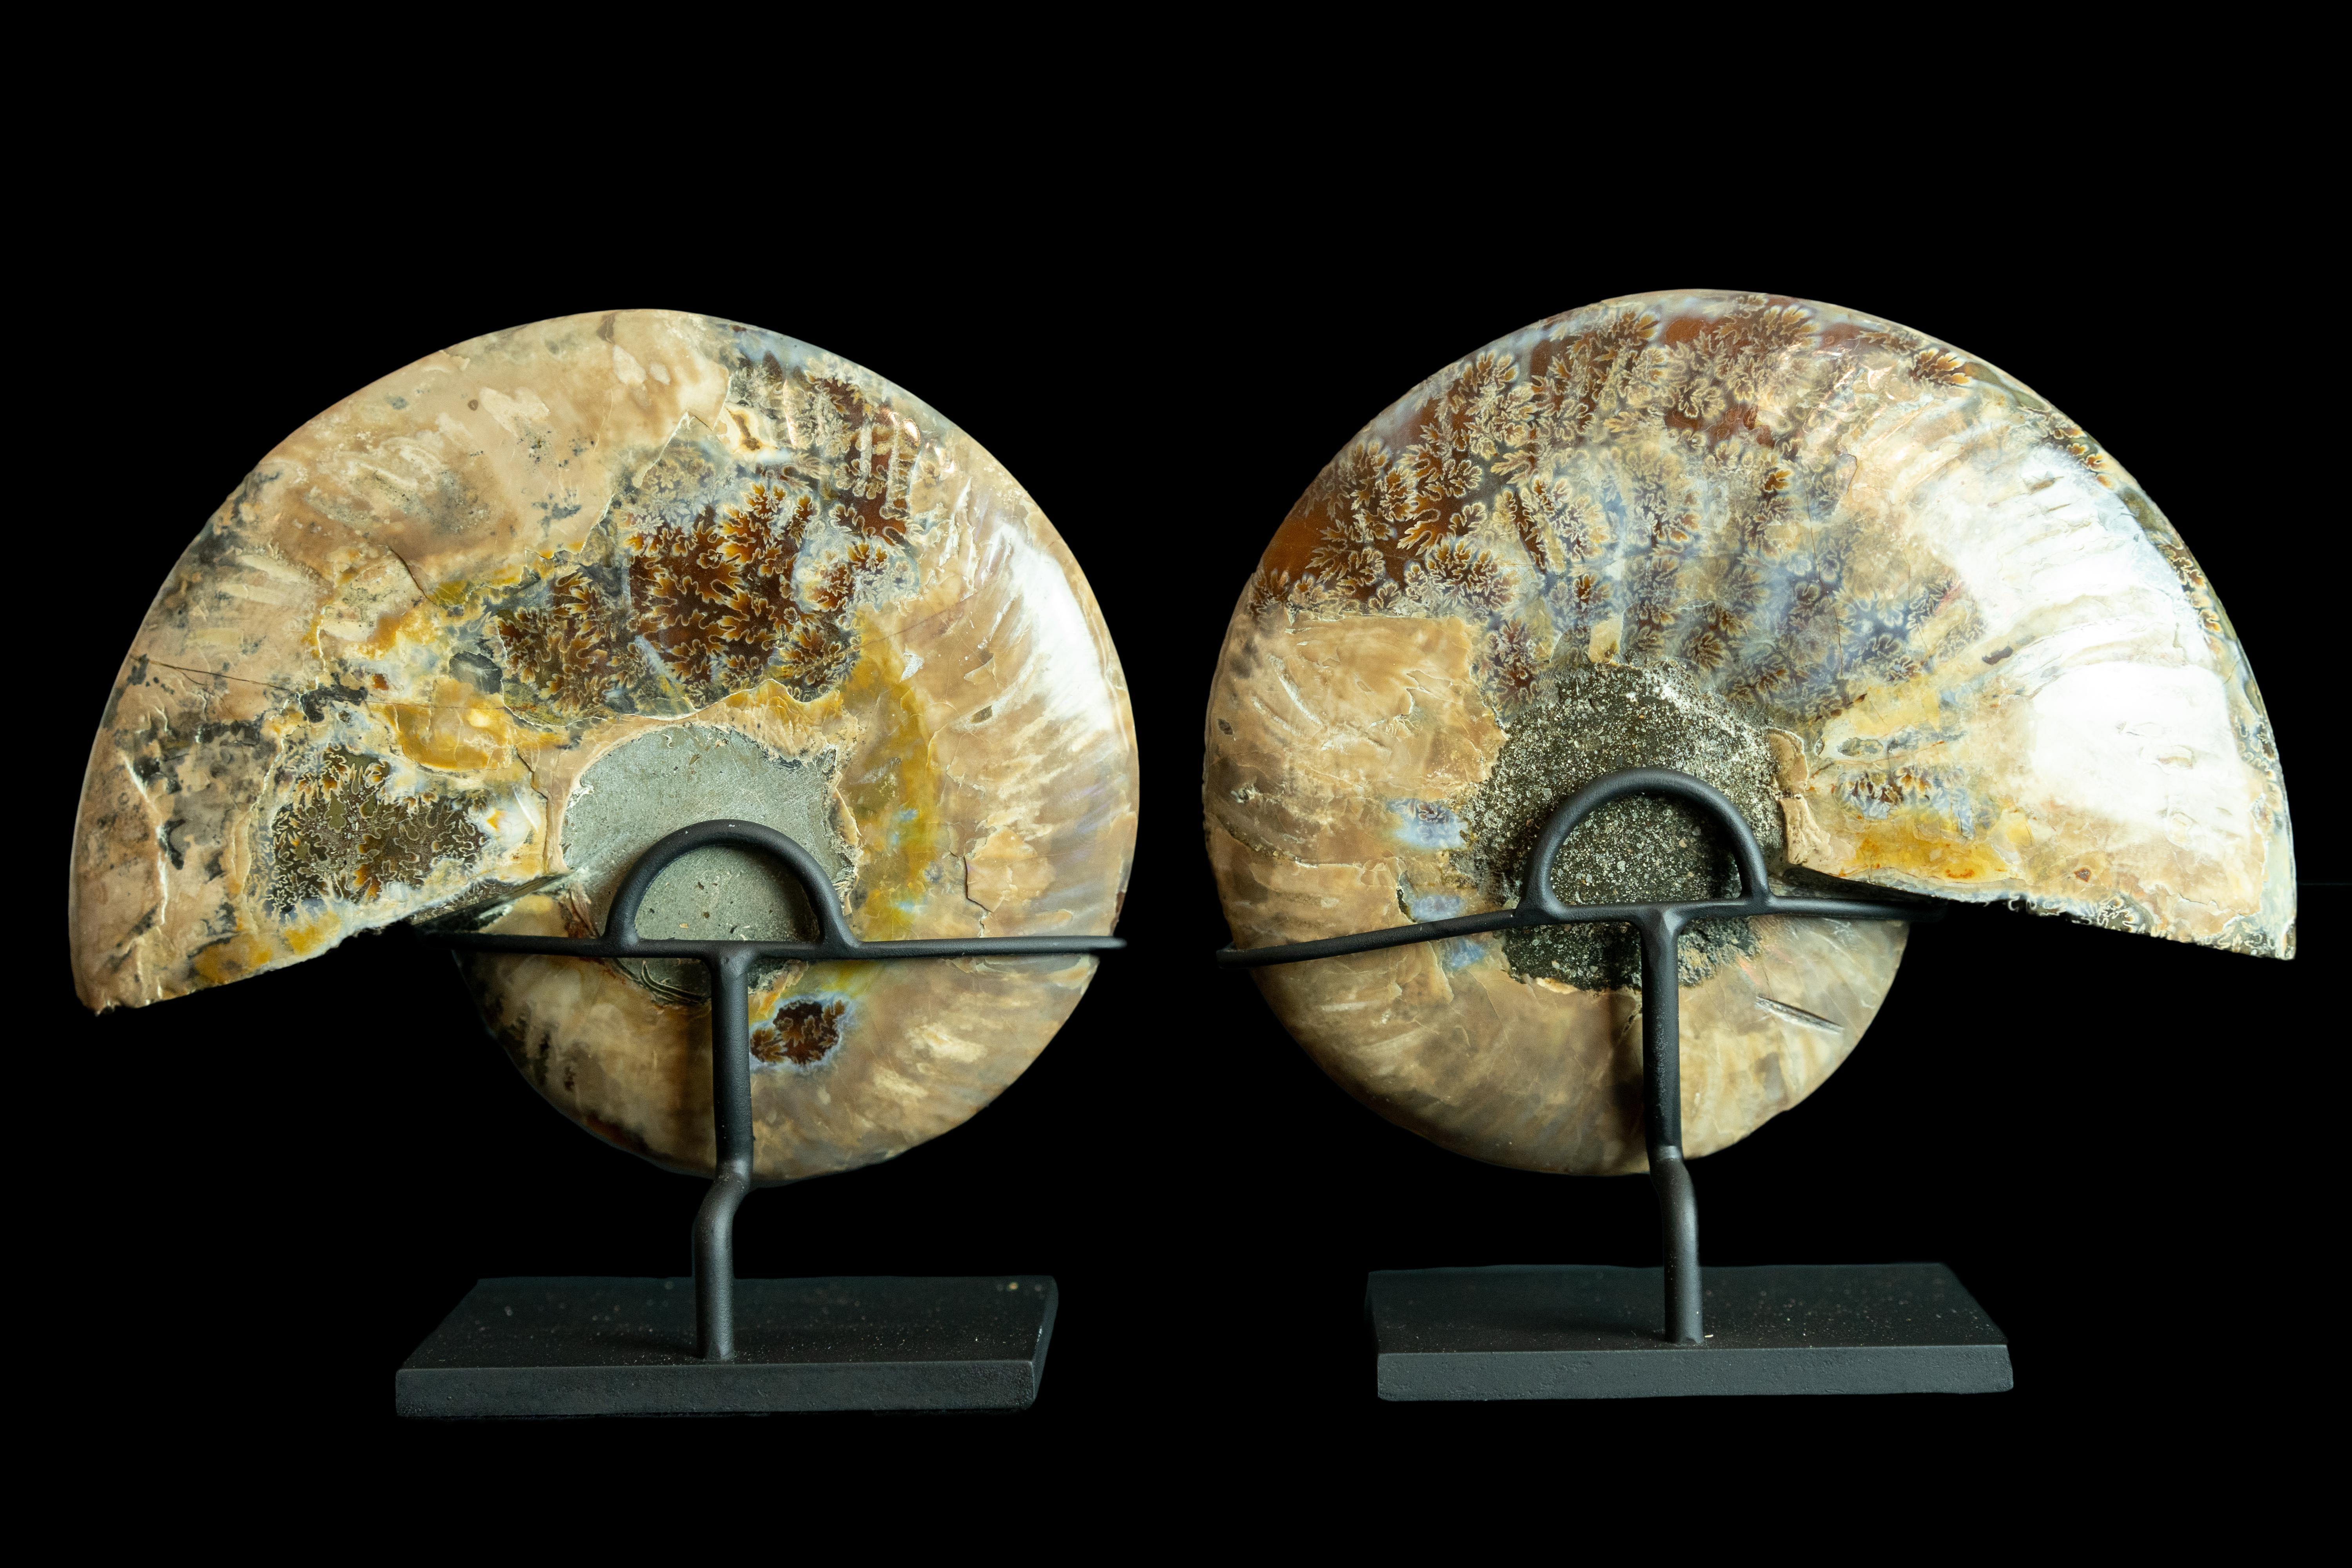 Pair of fossilized ammonite slices mounted on a black metal base. Ammonoids are an extinct group of marine mollusk animals closely related to octopuses, squid, and cuttlefish. The name 